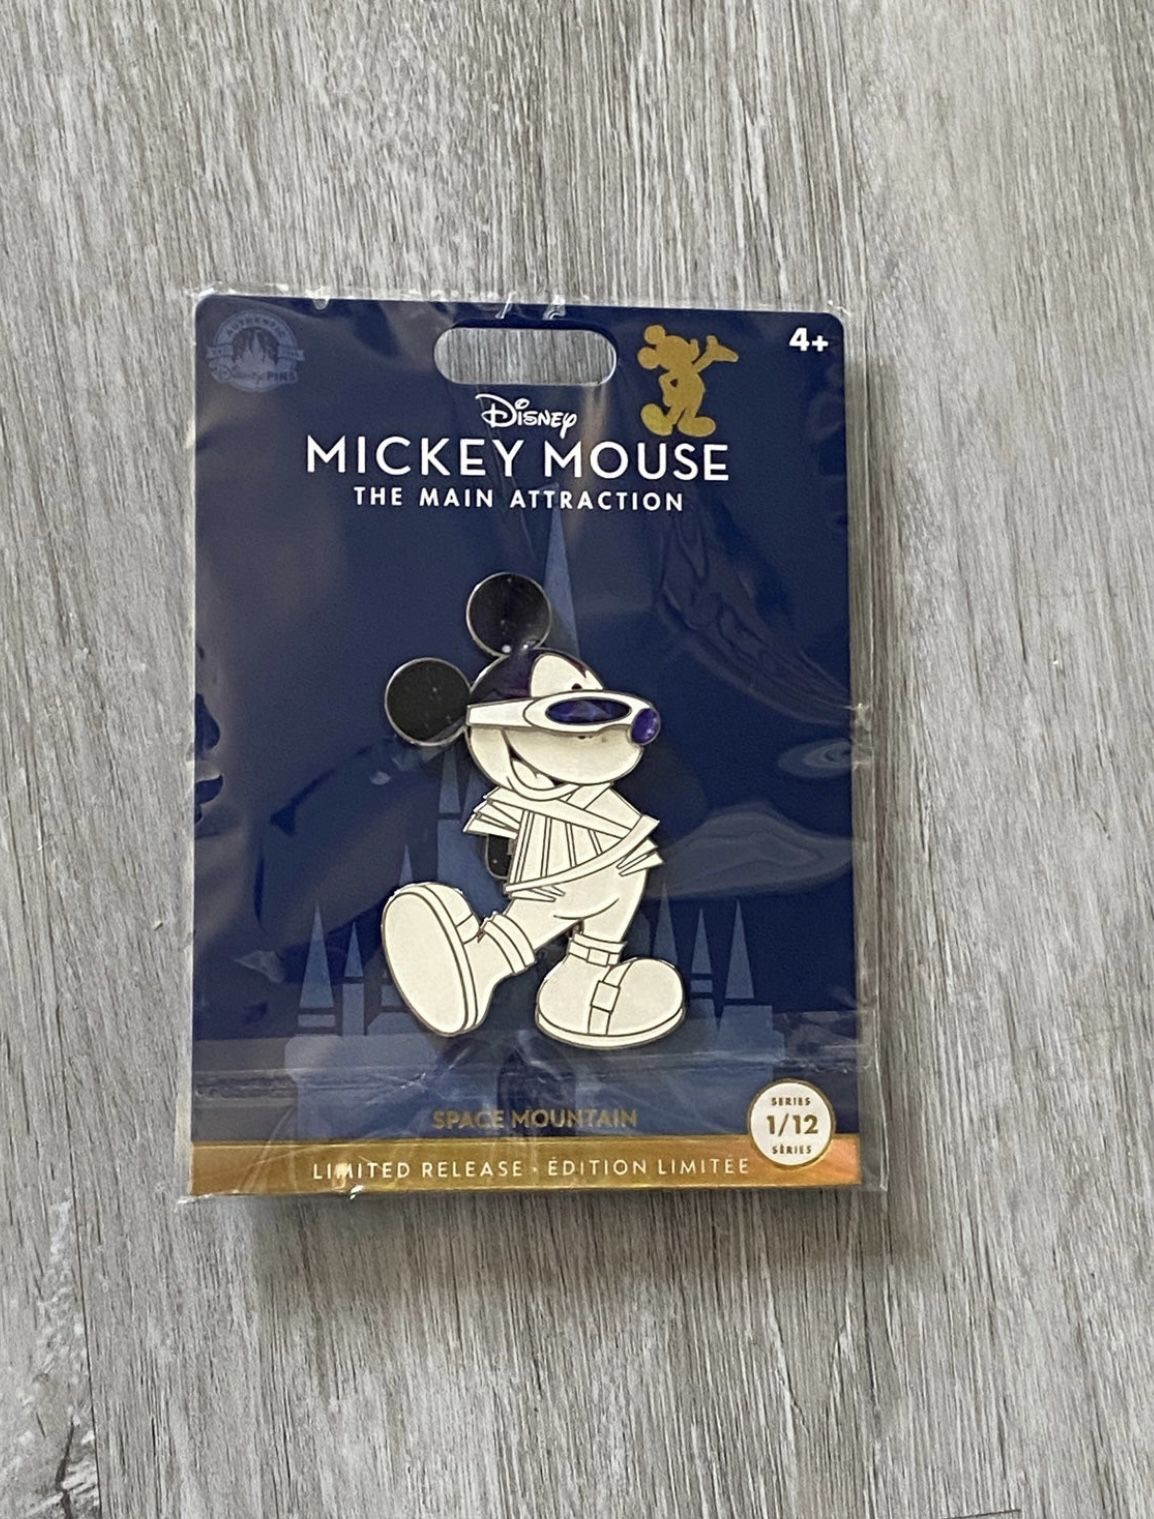 2022 Disney Mickey Mouse the Main Attraction Space Mountain Pin 1/12 LR